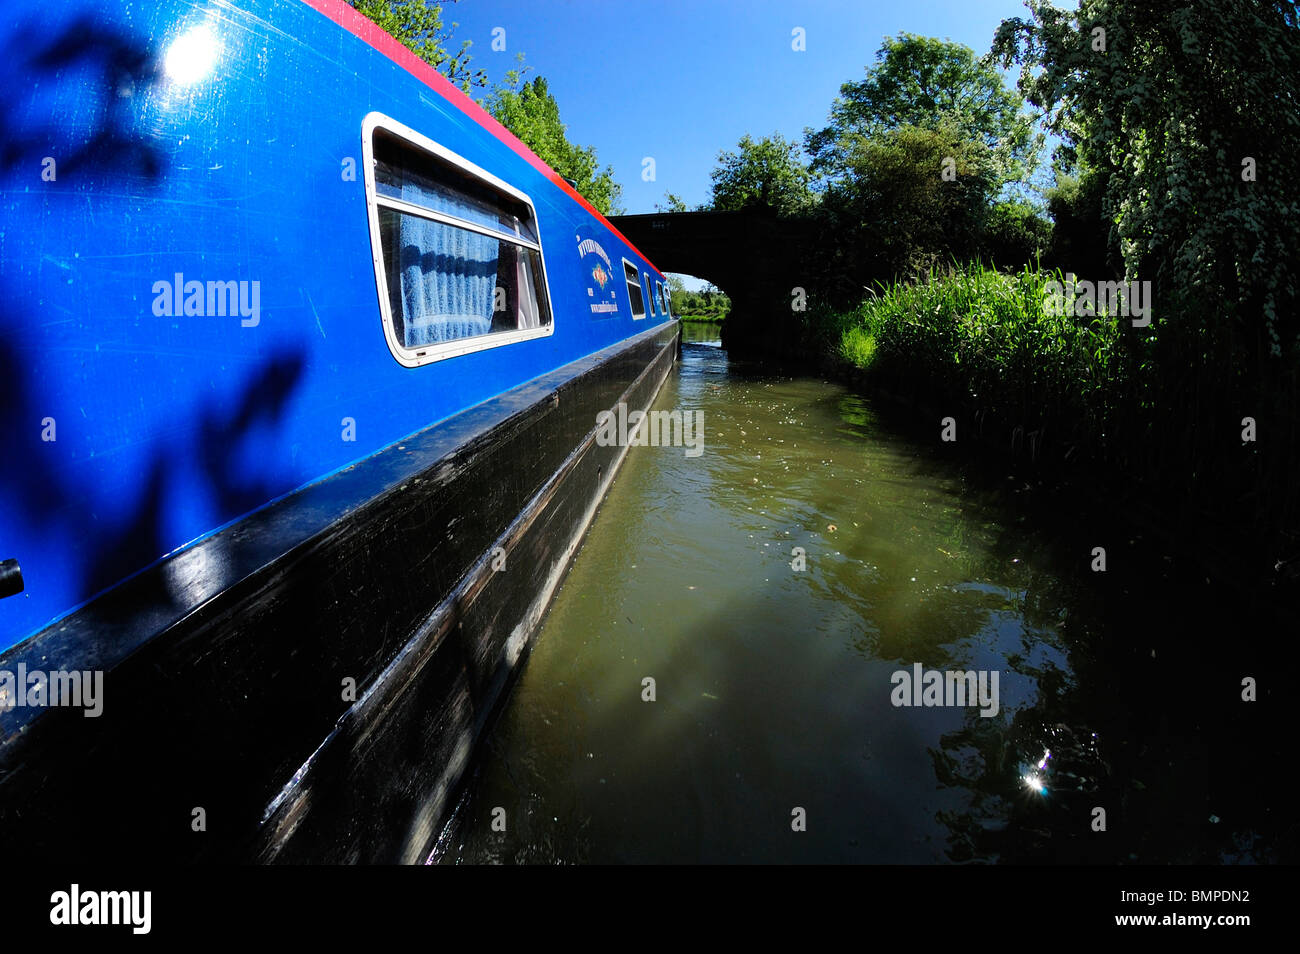 Side of Narrow Boat, Grand Union Canal, UK Stock Photo